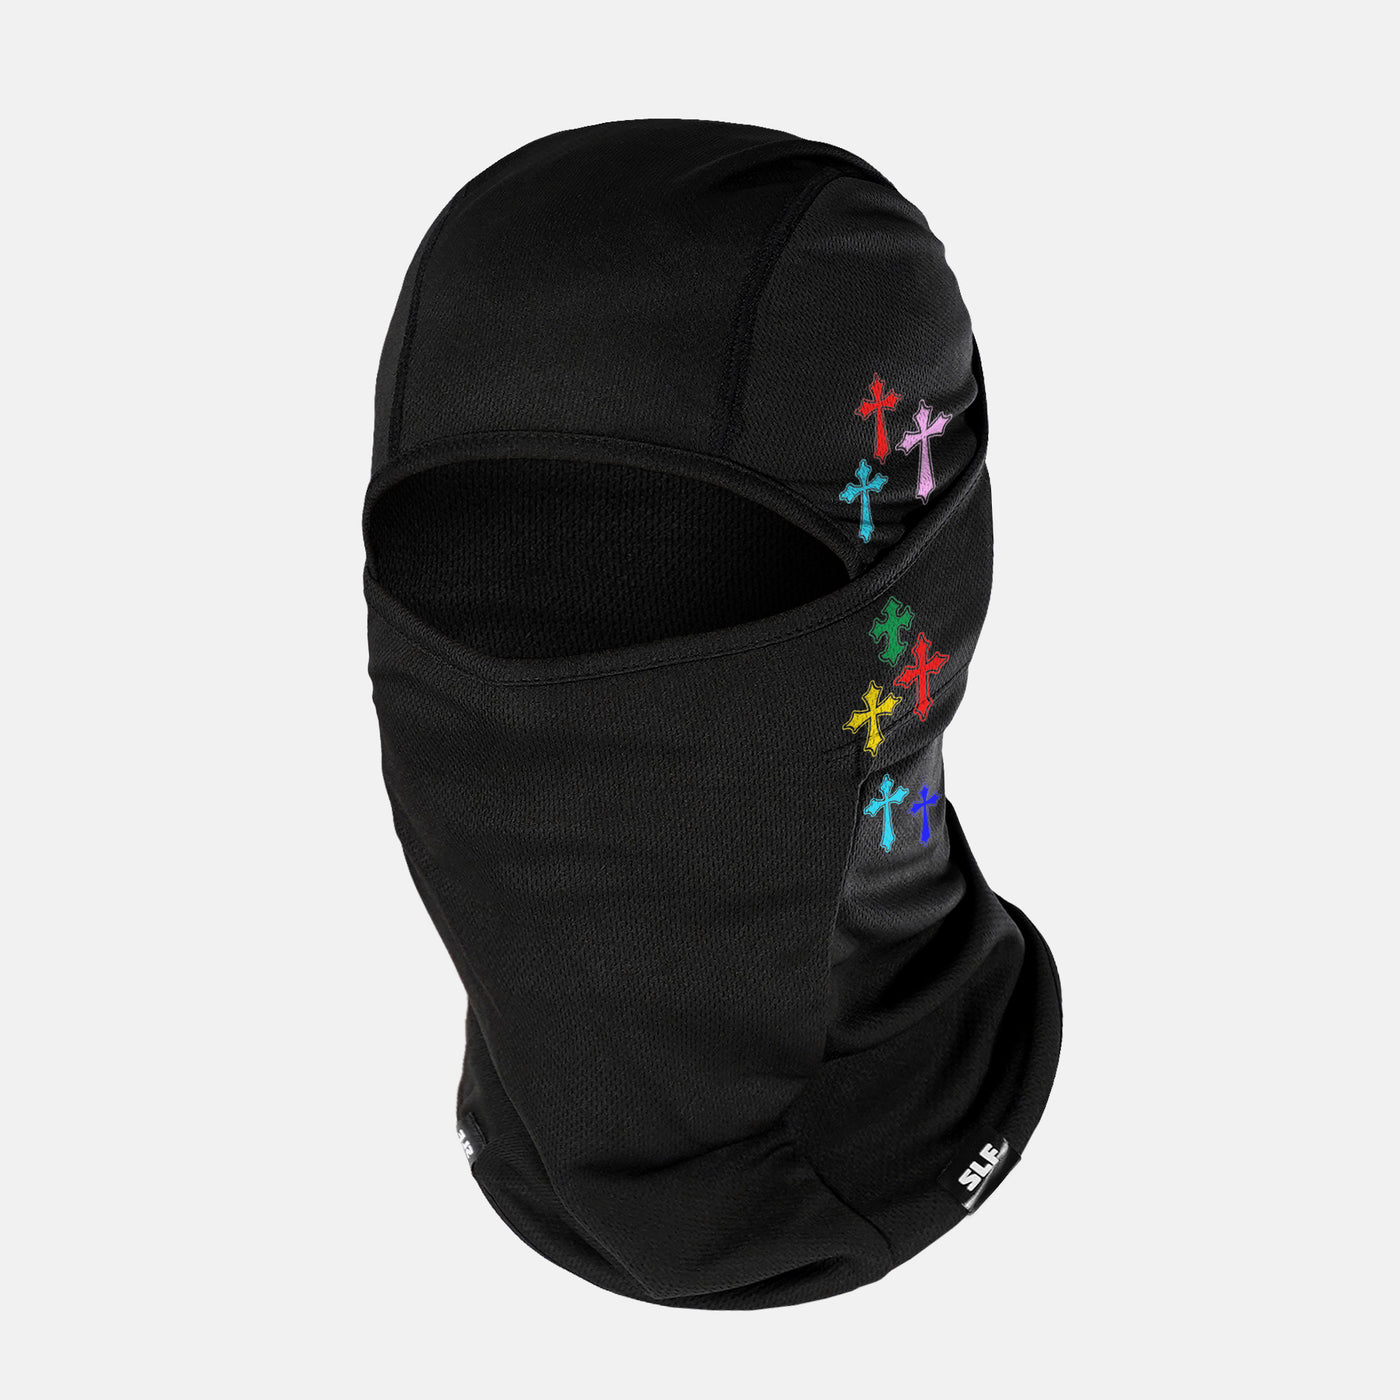 Crosses Chroma Loose-fitting Shiesty Mask